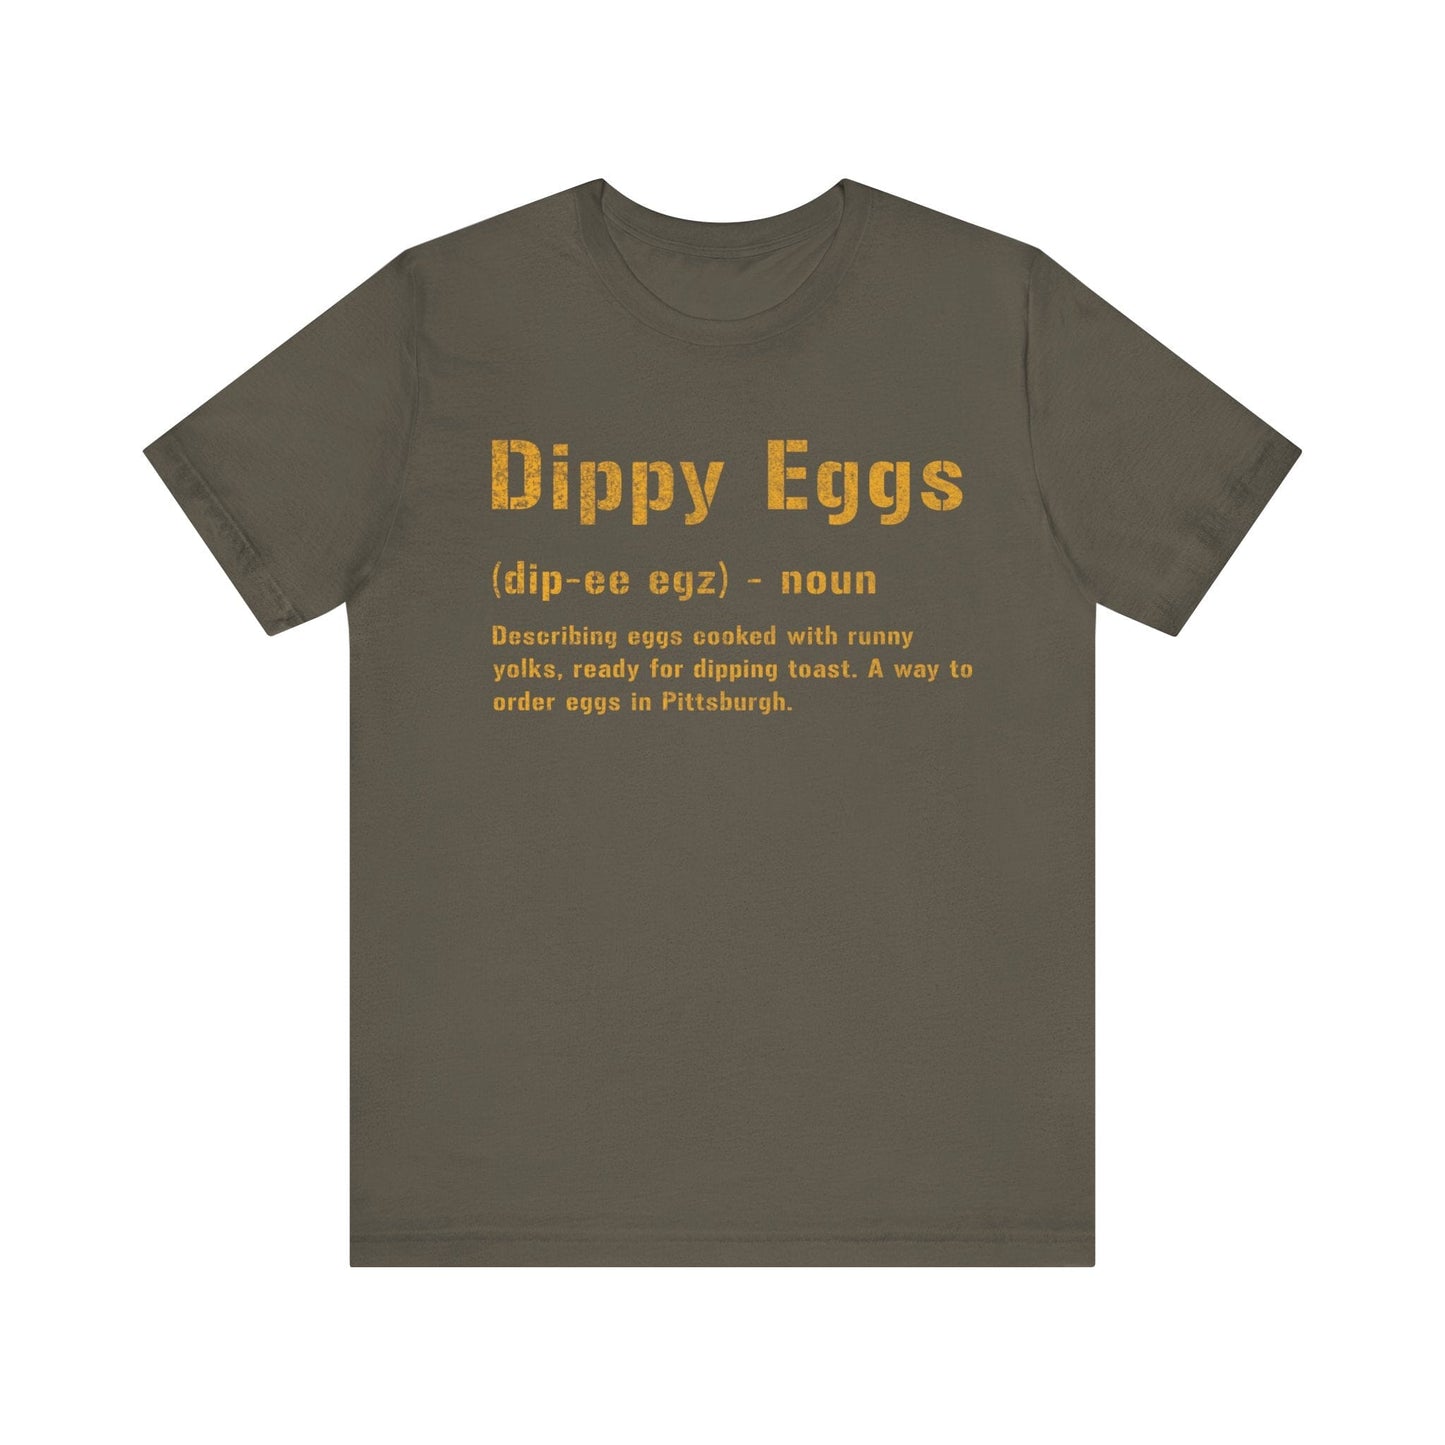 Dippy Eggs T-Shirt | Pittsburghese Shirt | Great Gift For Yinzers T-Shirt Yinzergear Army S 